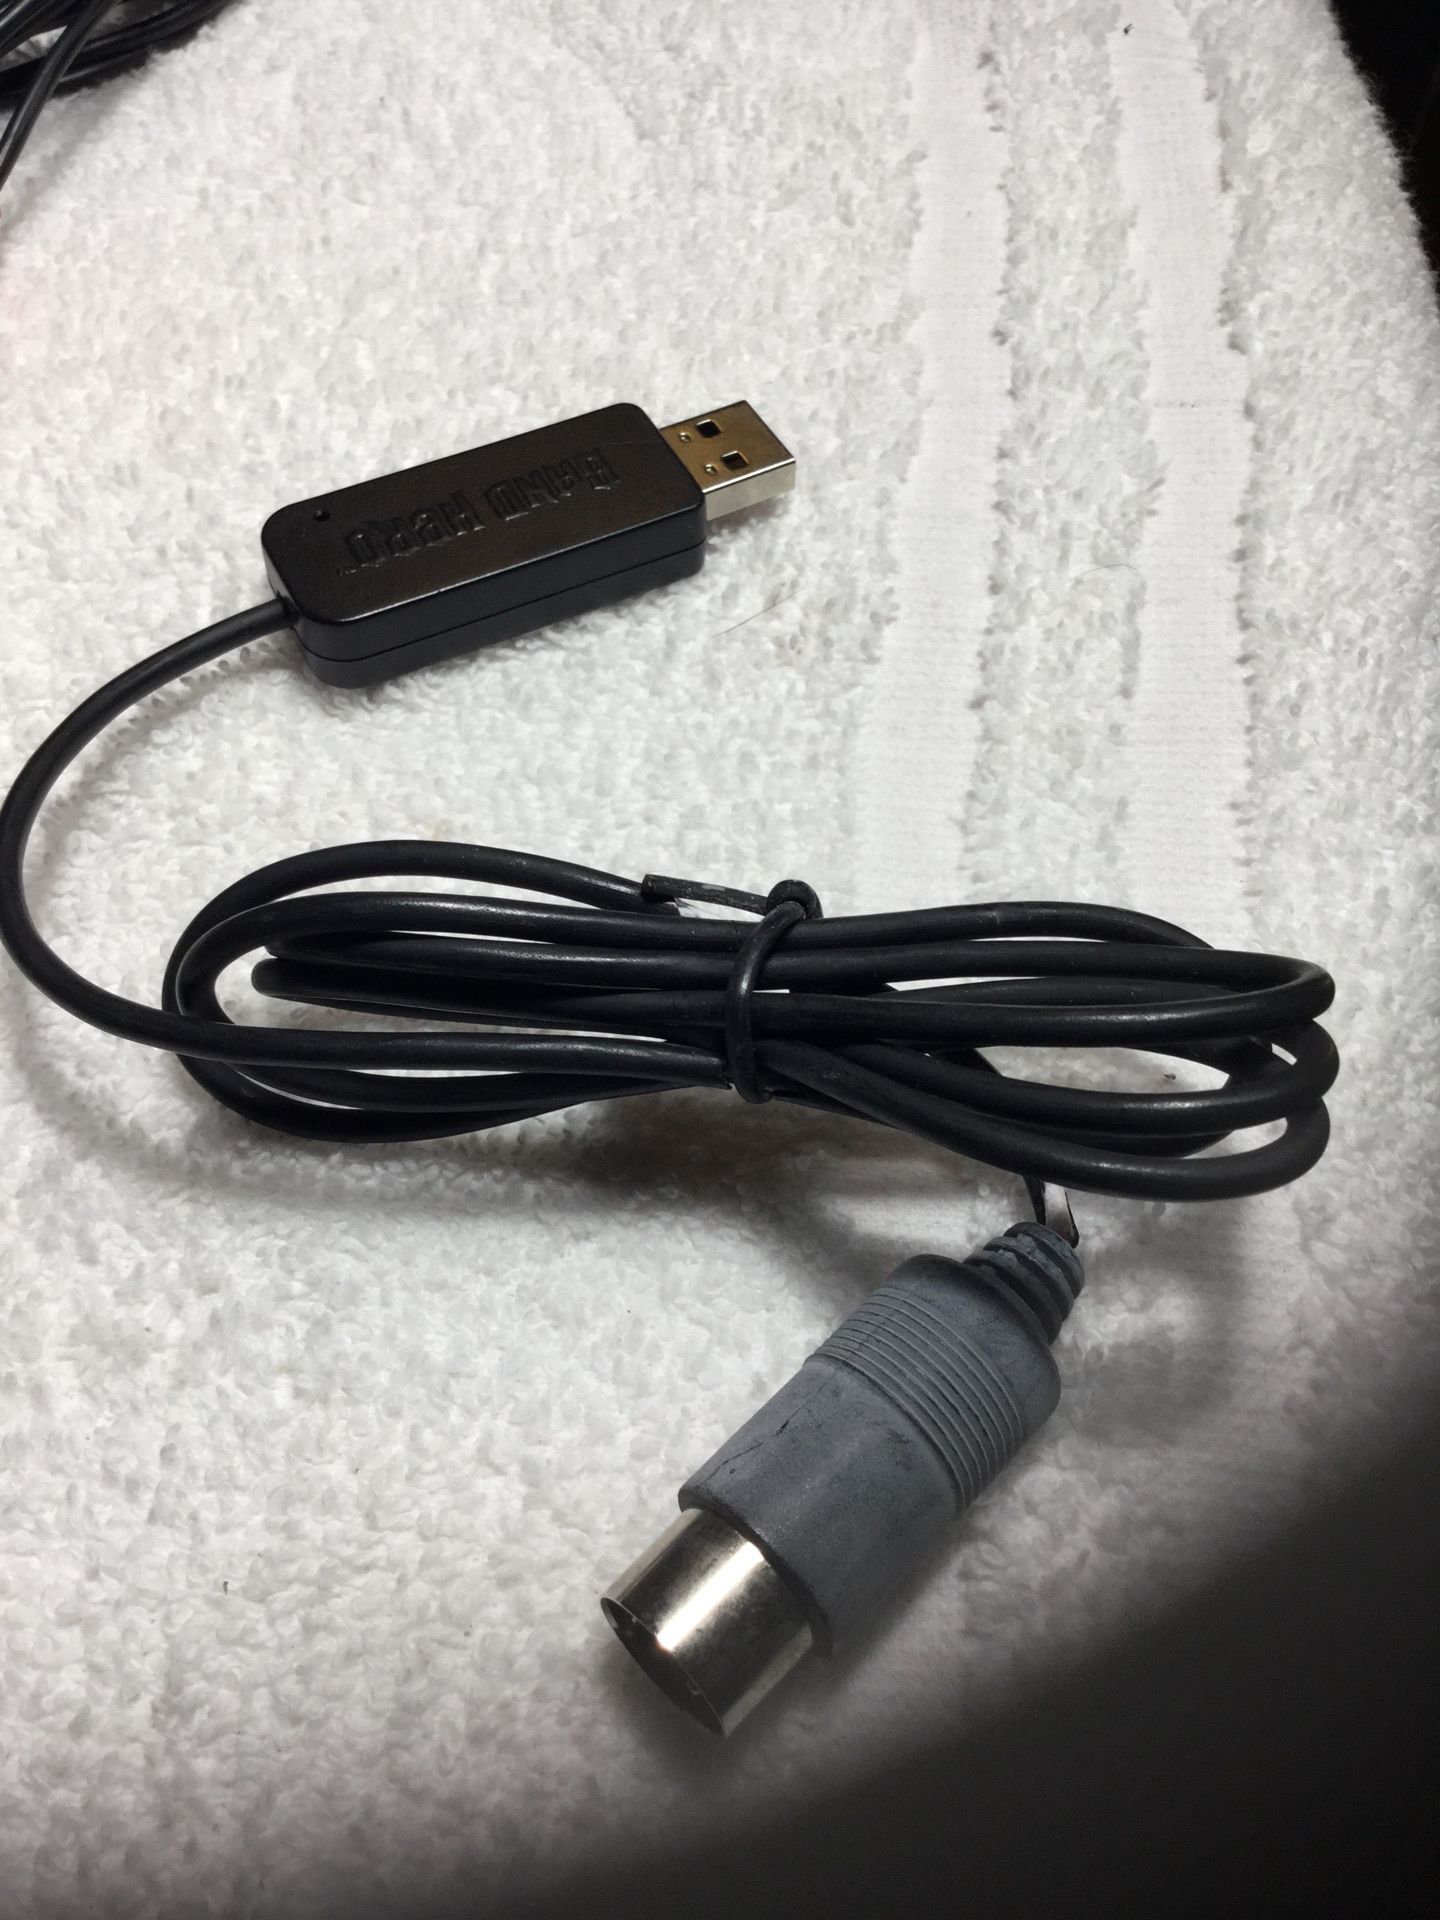 USB to RS422 adapter For use with band hero guitar hero and other software Free shipping and paid with PayPal